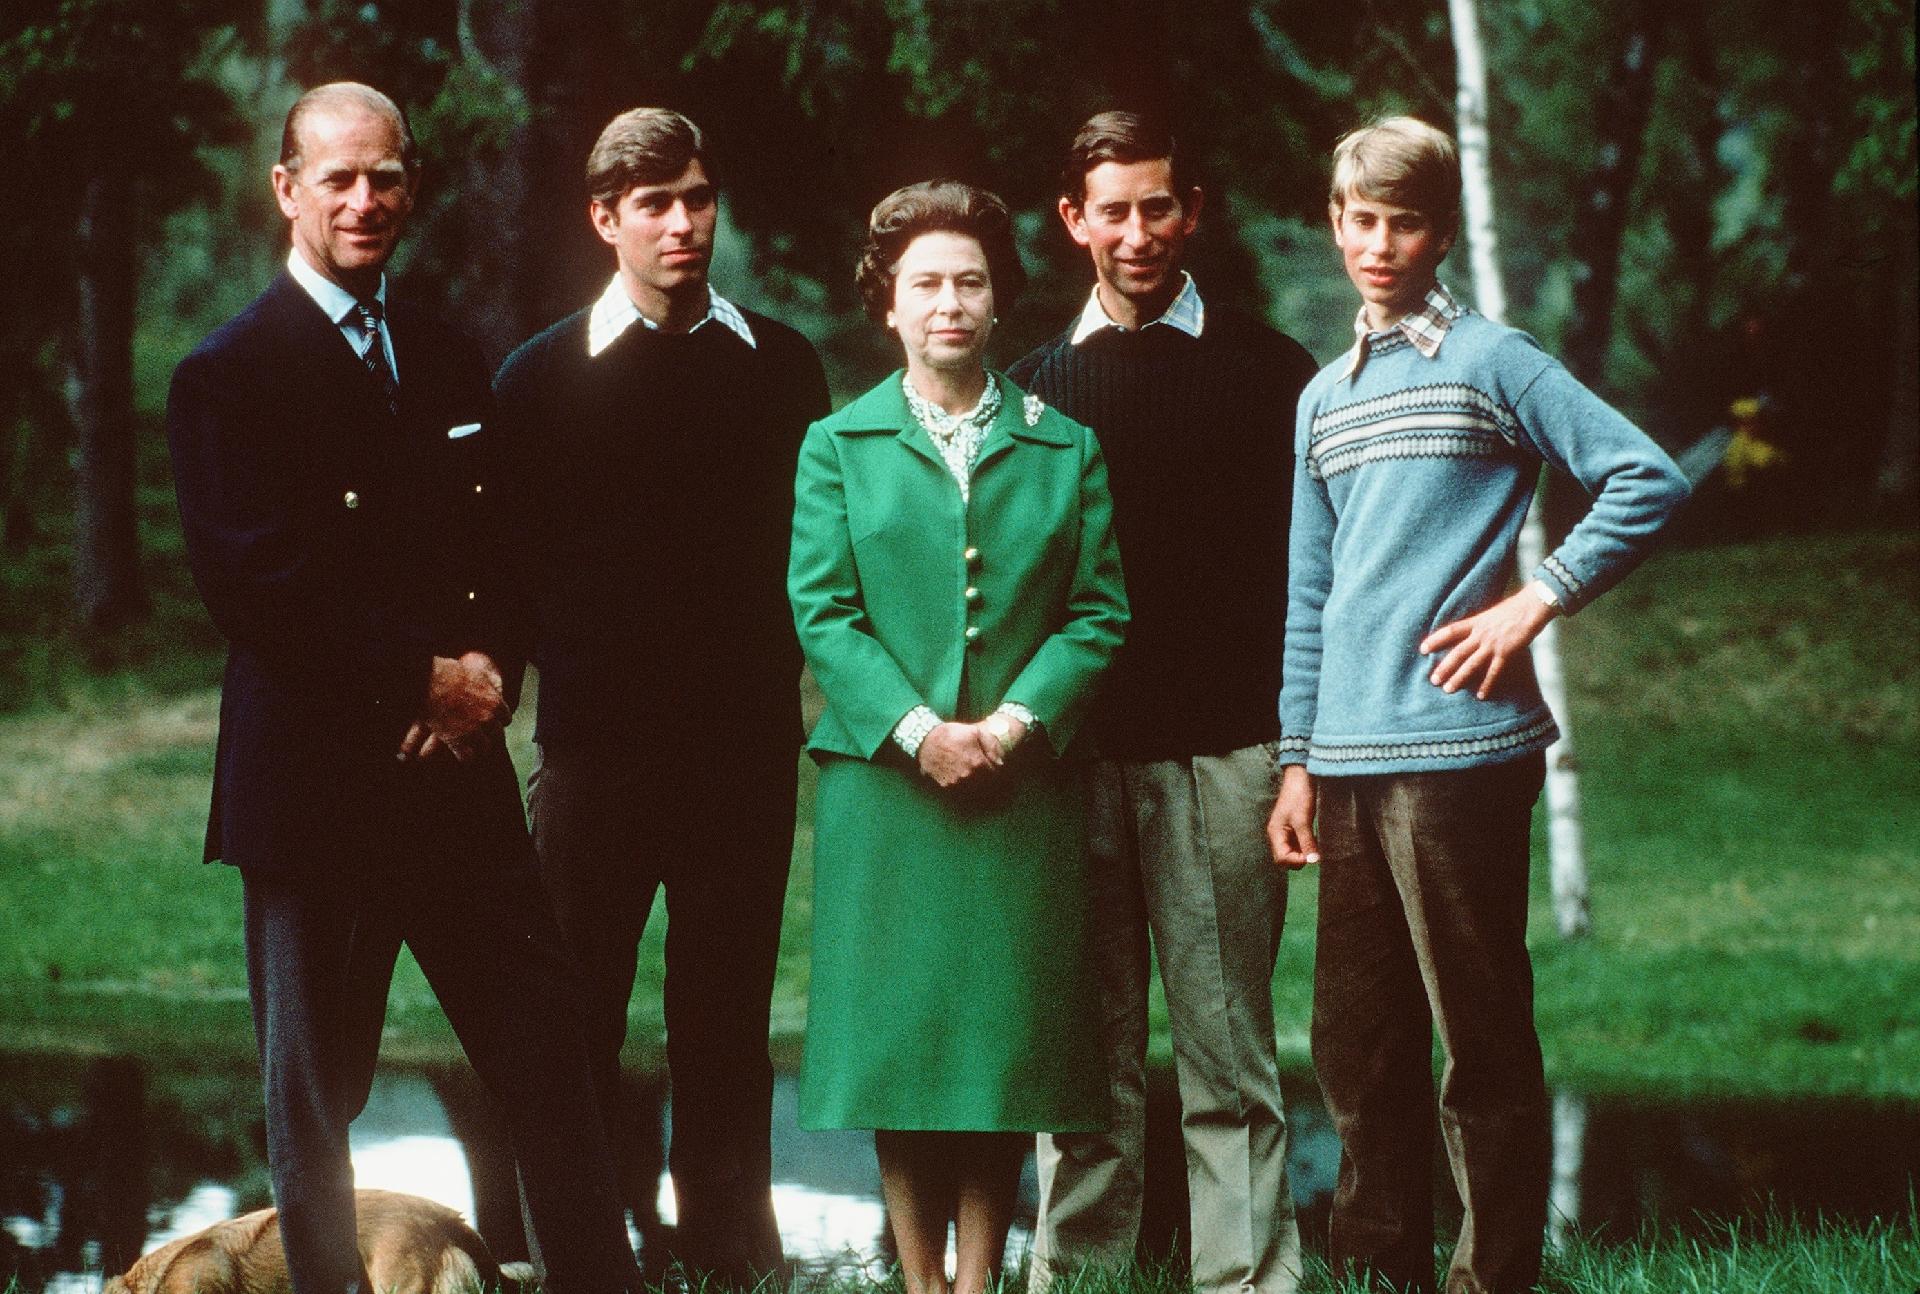 Queen Elizabeth II in a family photo with her husband Prince Philip and children Andrew, Charles and Edward in Scotland in 1979 - Getty Images